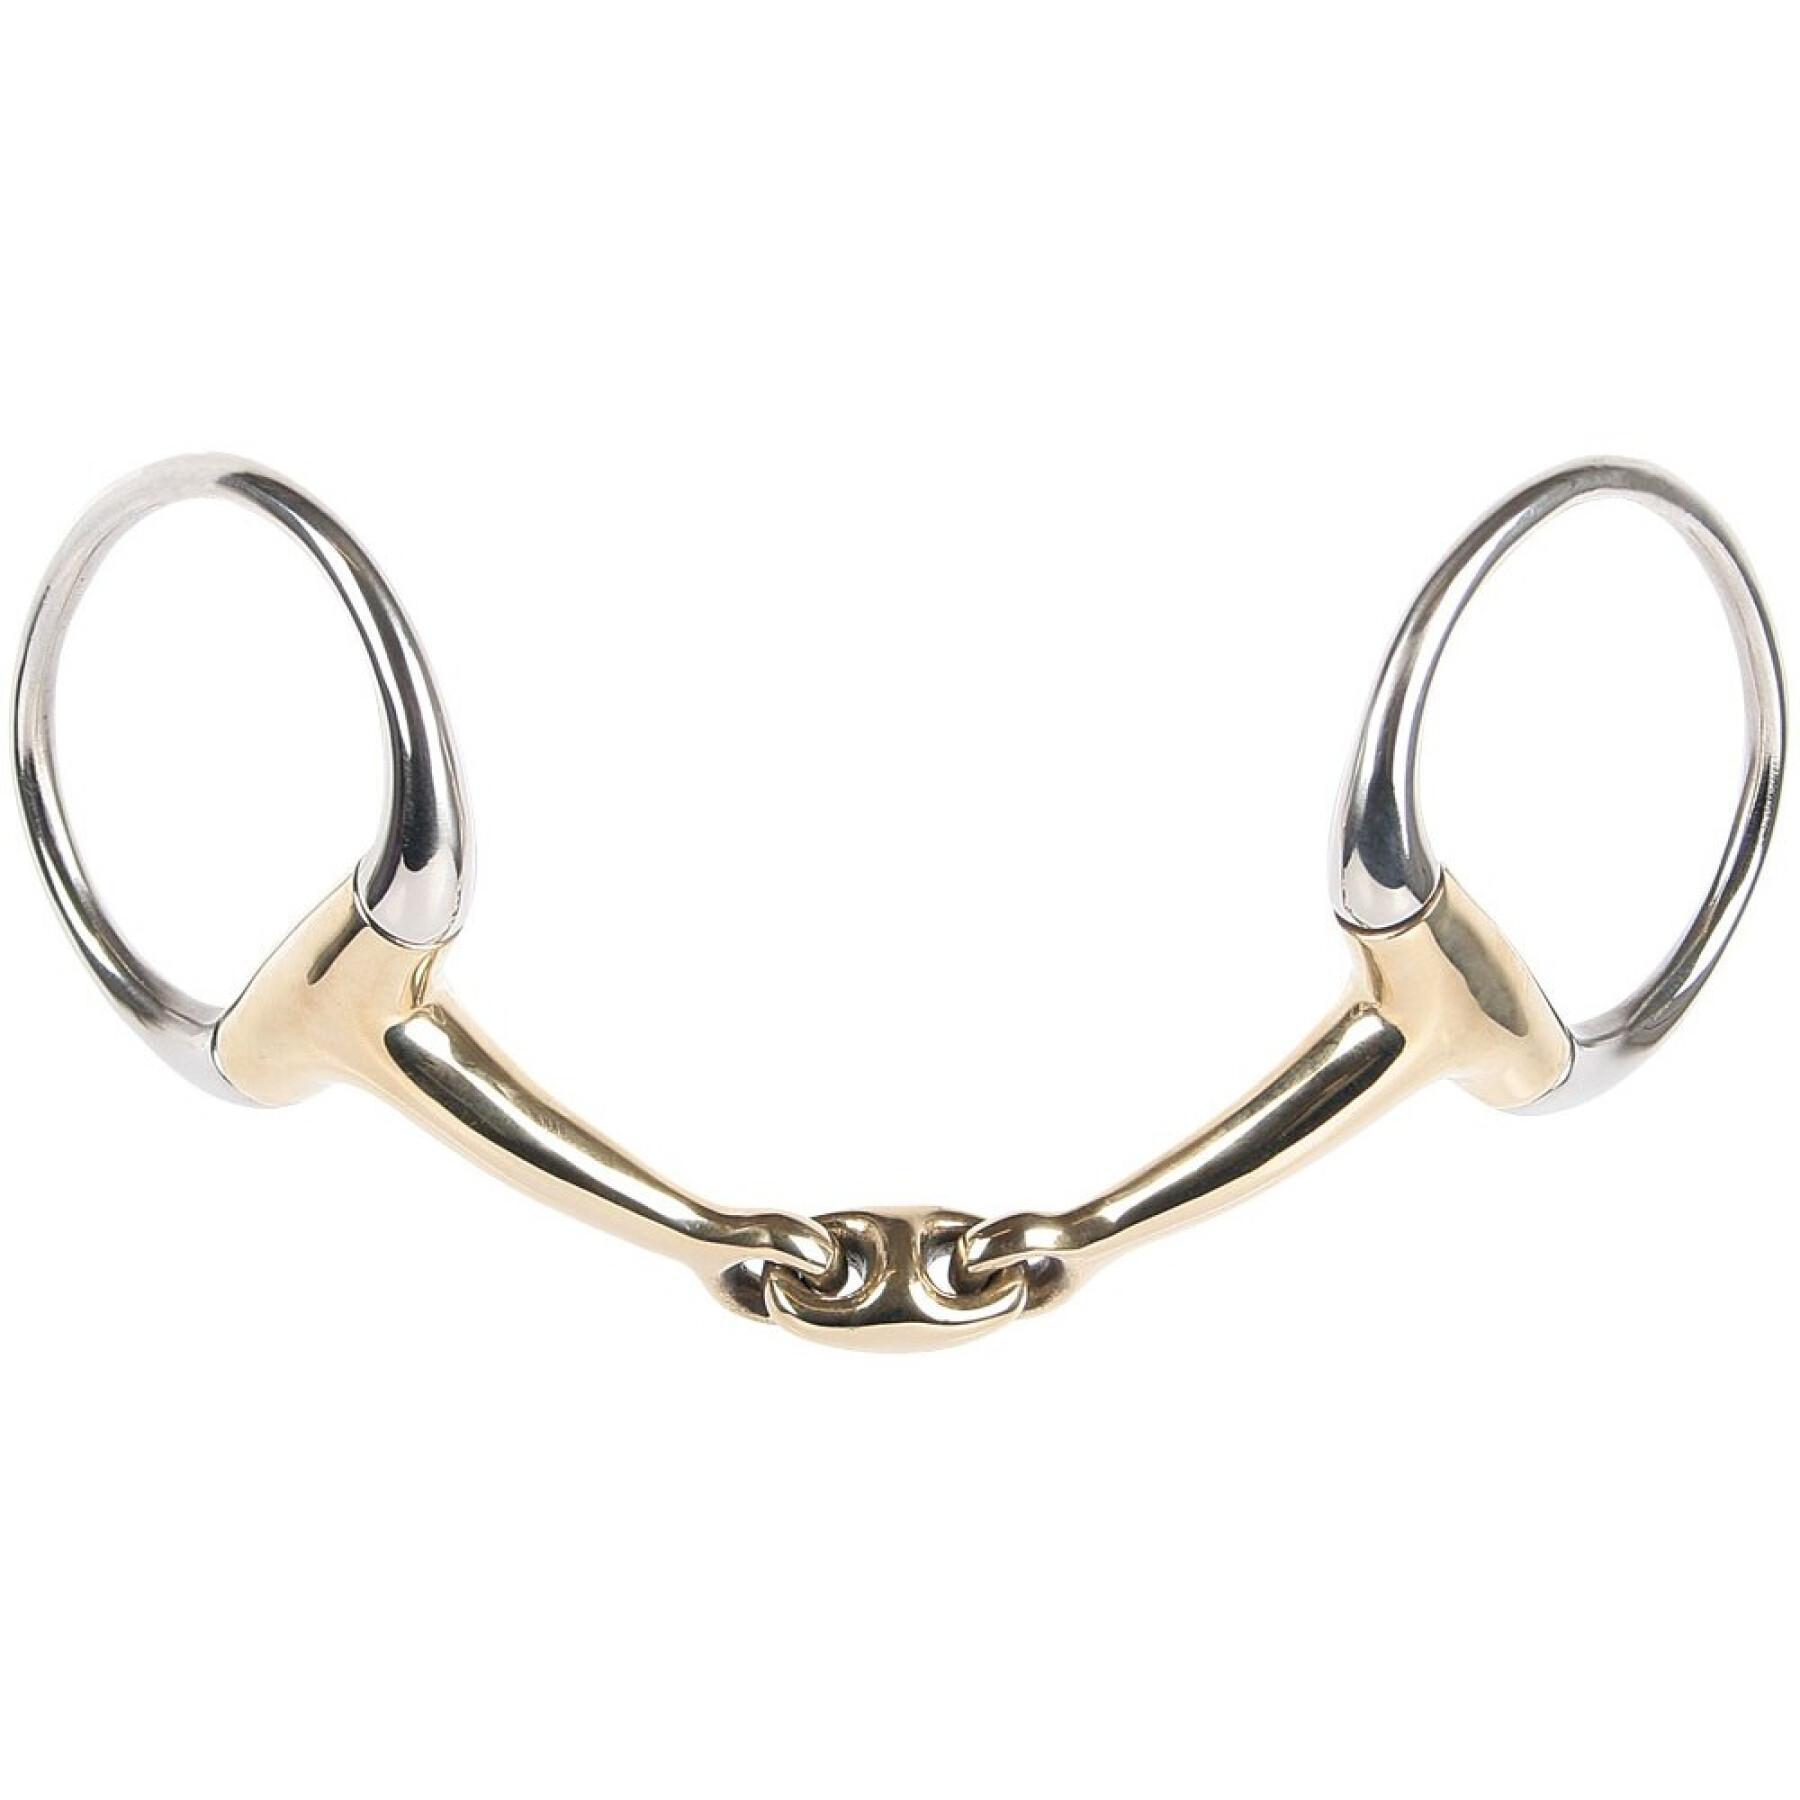 Anatomical double olive bit for horses Harry's Horse